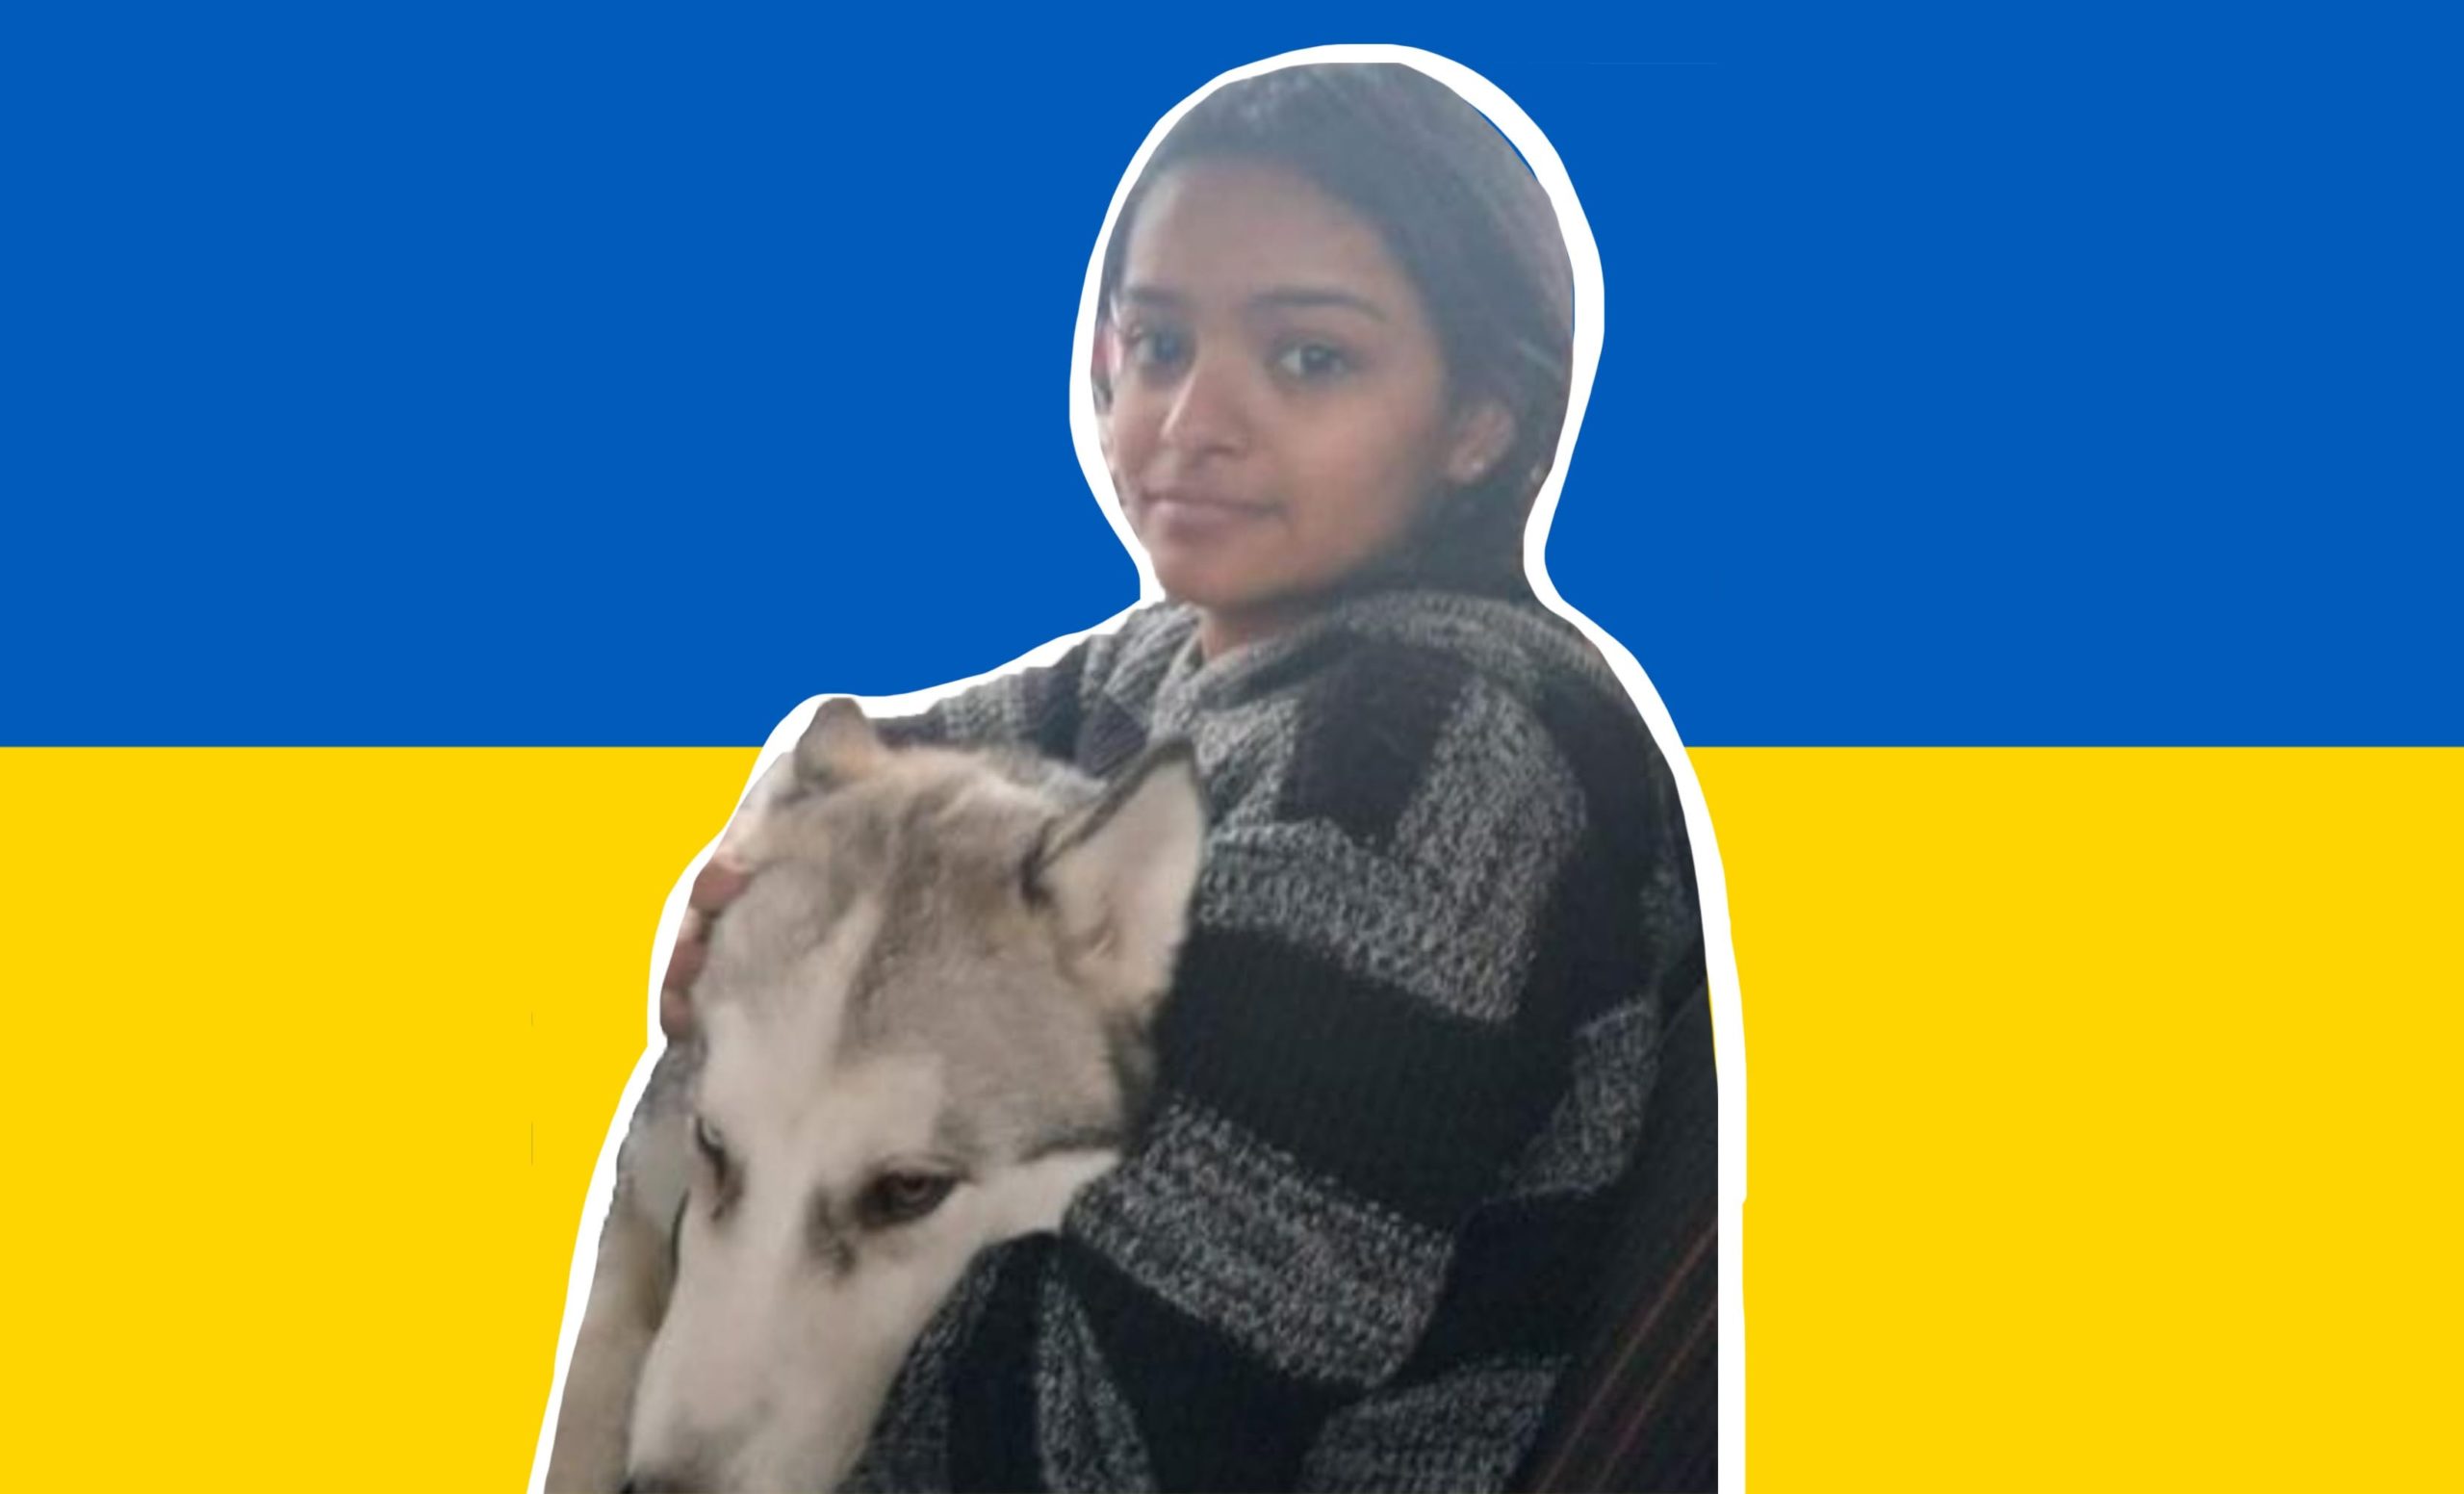 Kerala Girl Refuses To Leave Ukraine Without Her Pet Dog, Seeks Travel Permit From Indian Authorities